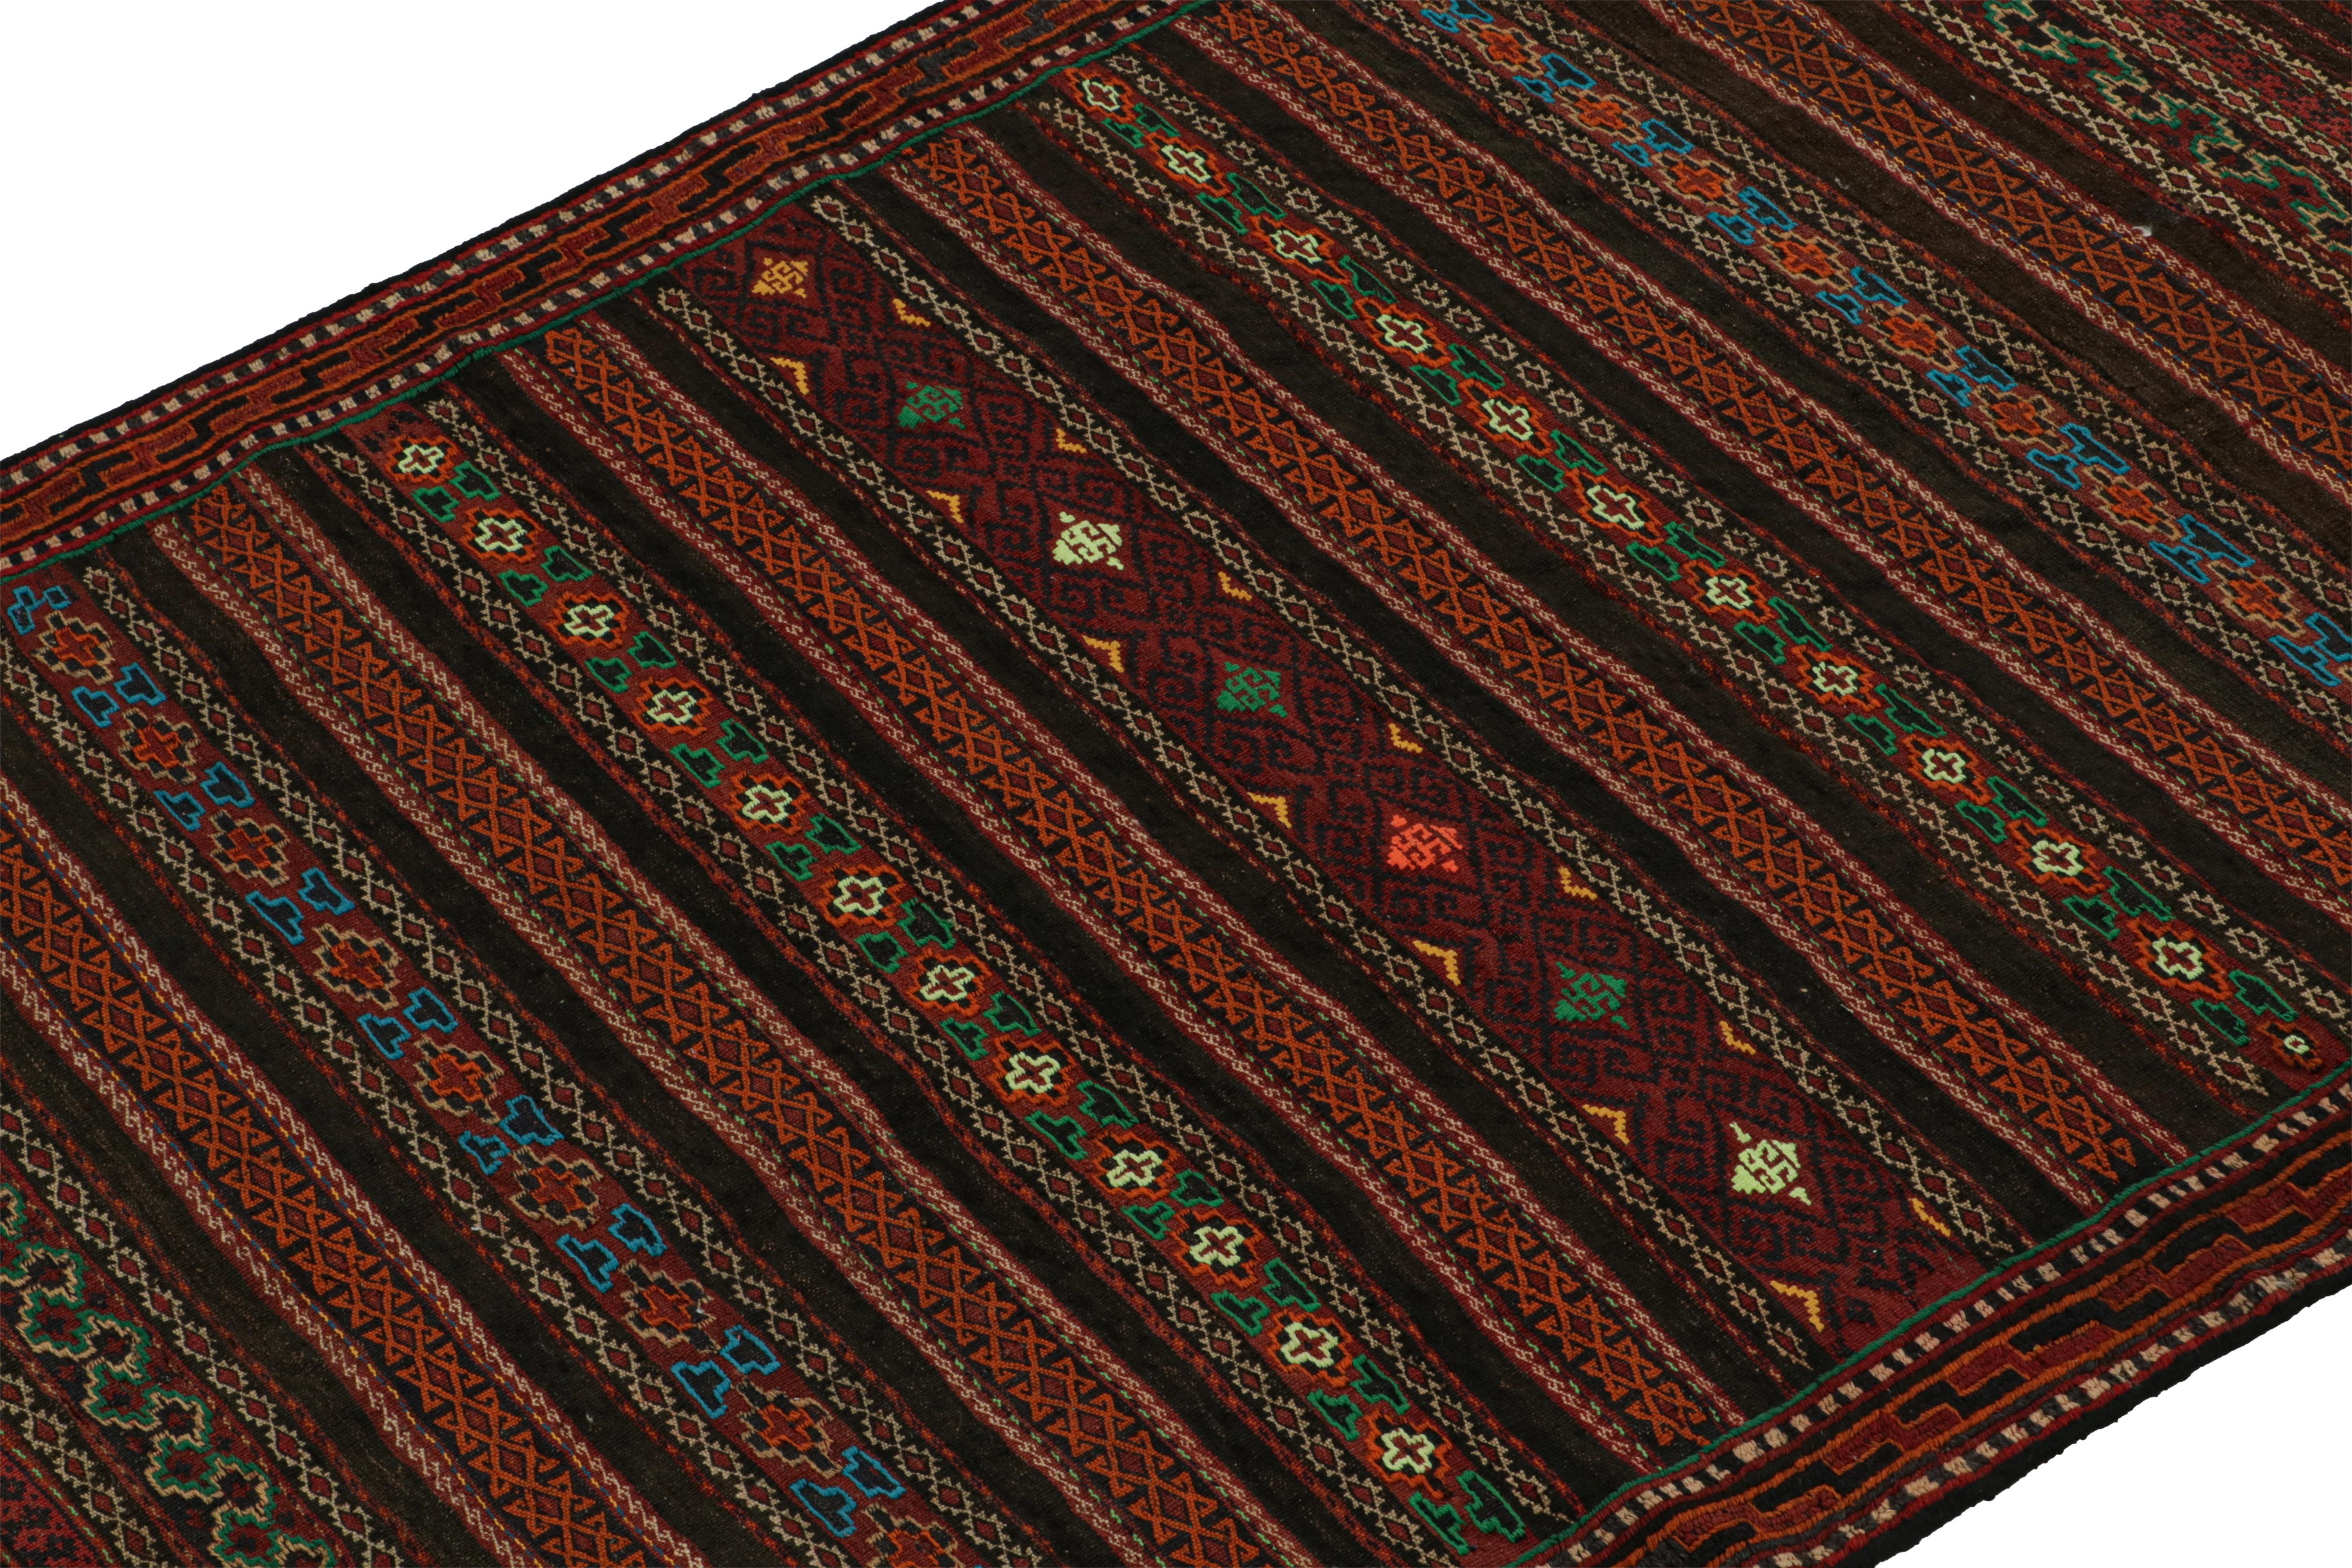 Hand-Woven Vintage Baluch Tribal Kilim in Brown with Geometric Patterns, from Rug & Kilim For Sale